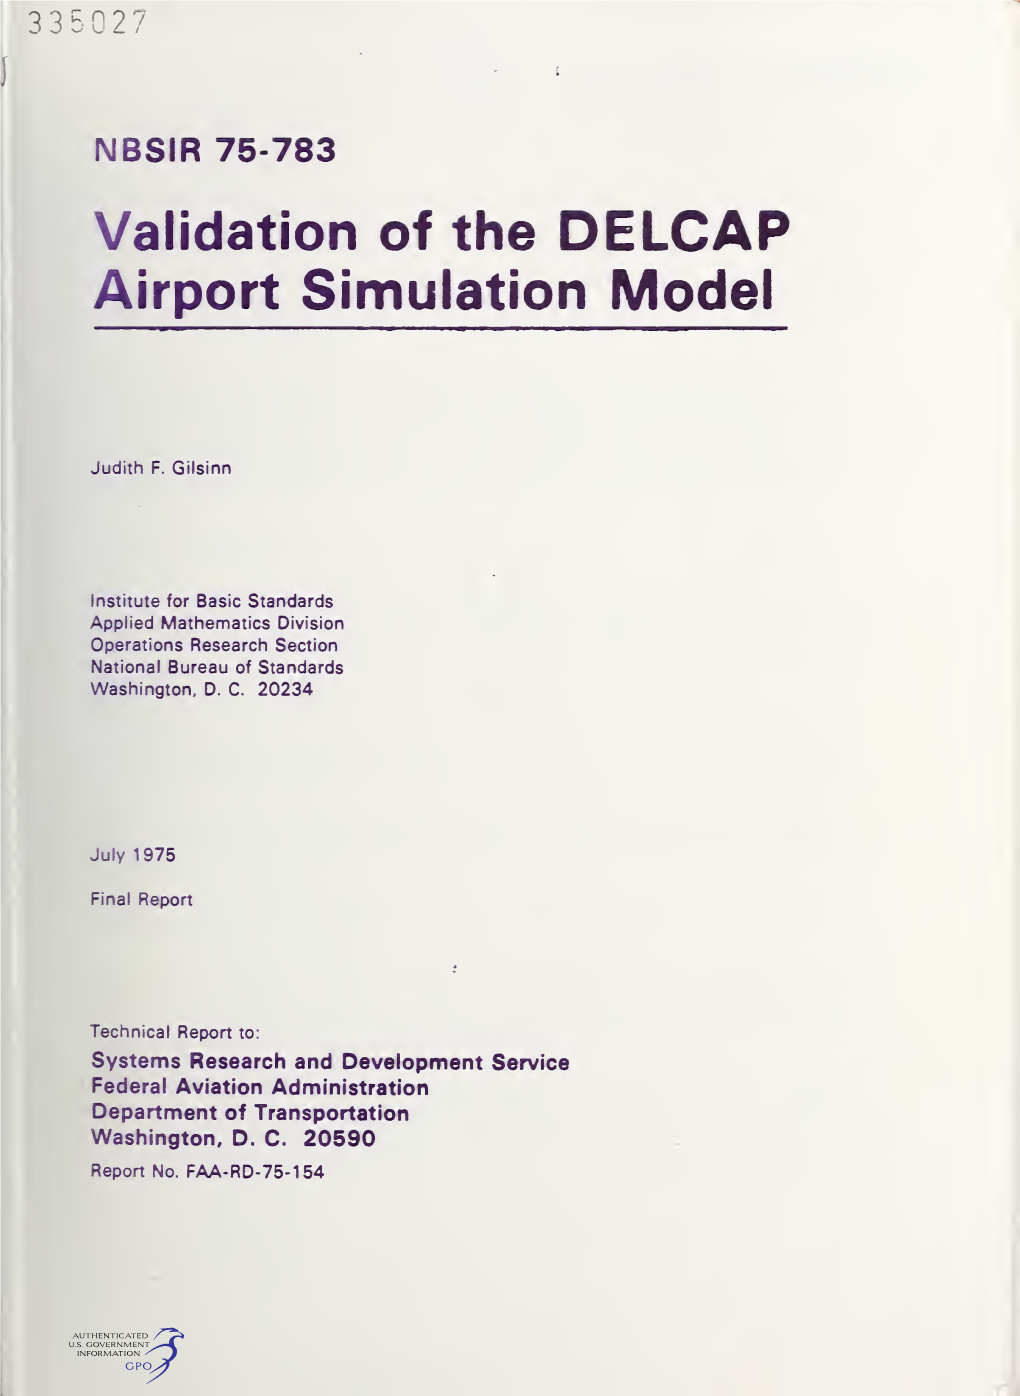 Validation of the DELCAP Airport Simulation Model